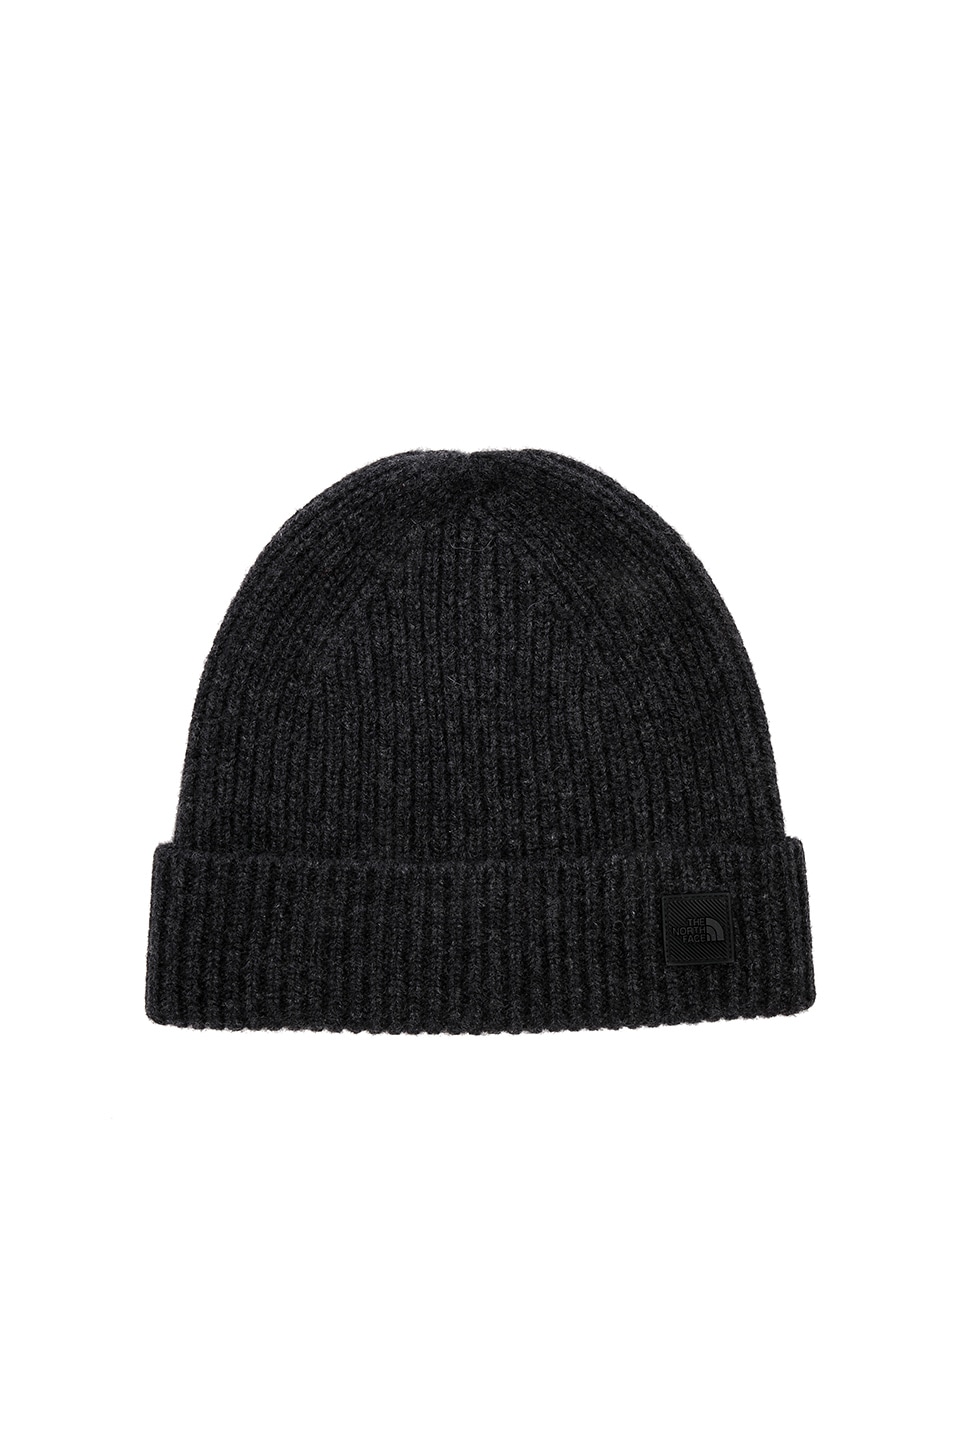 Image 1 of Cryos Cashmere Beanie in TNF Black Heather